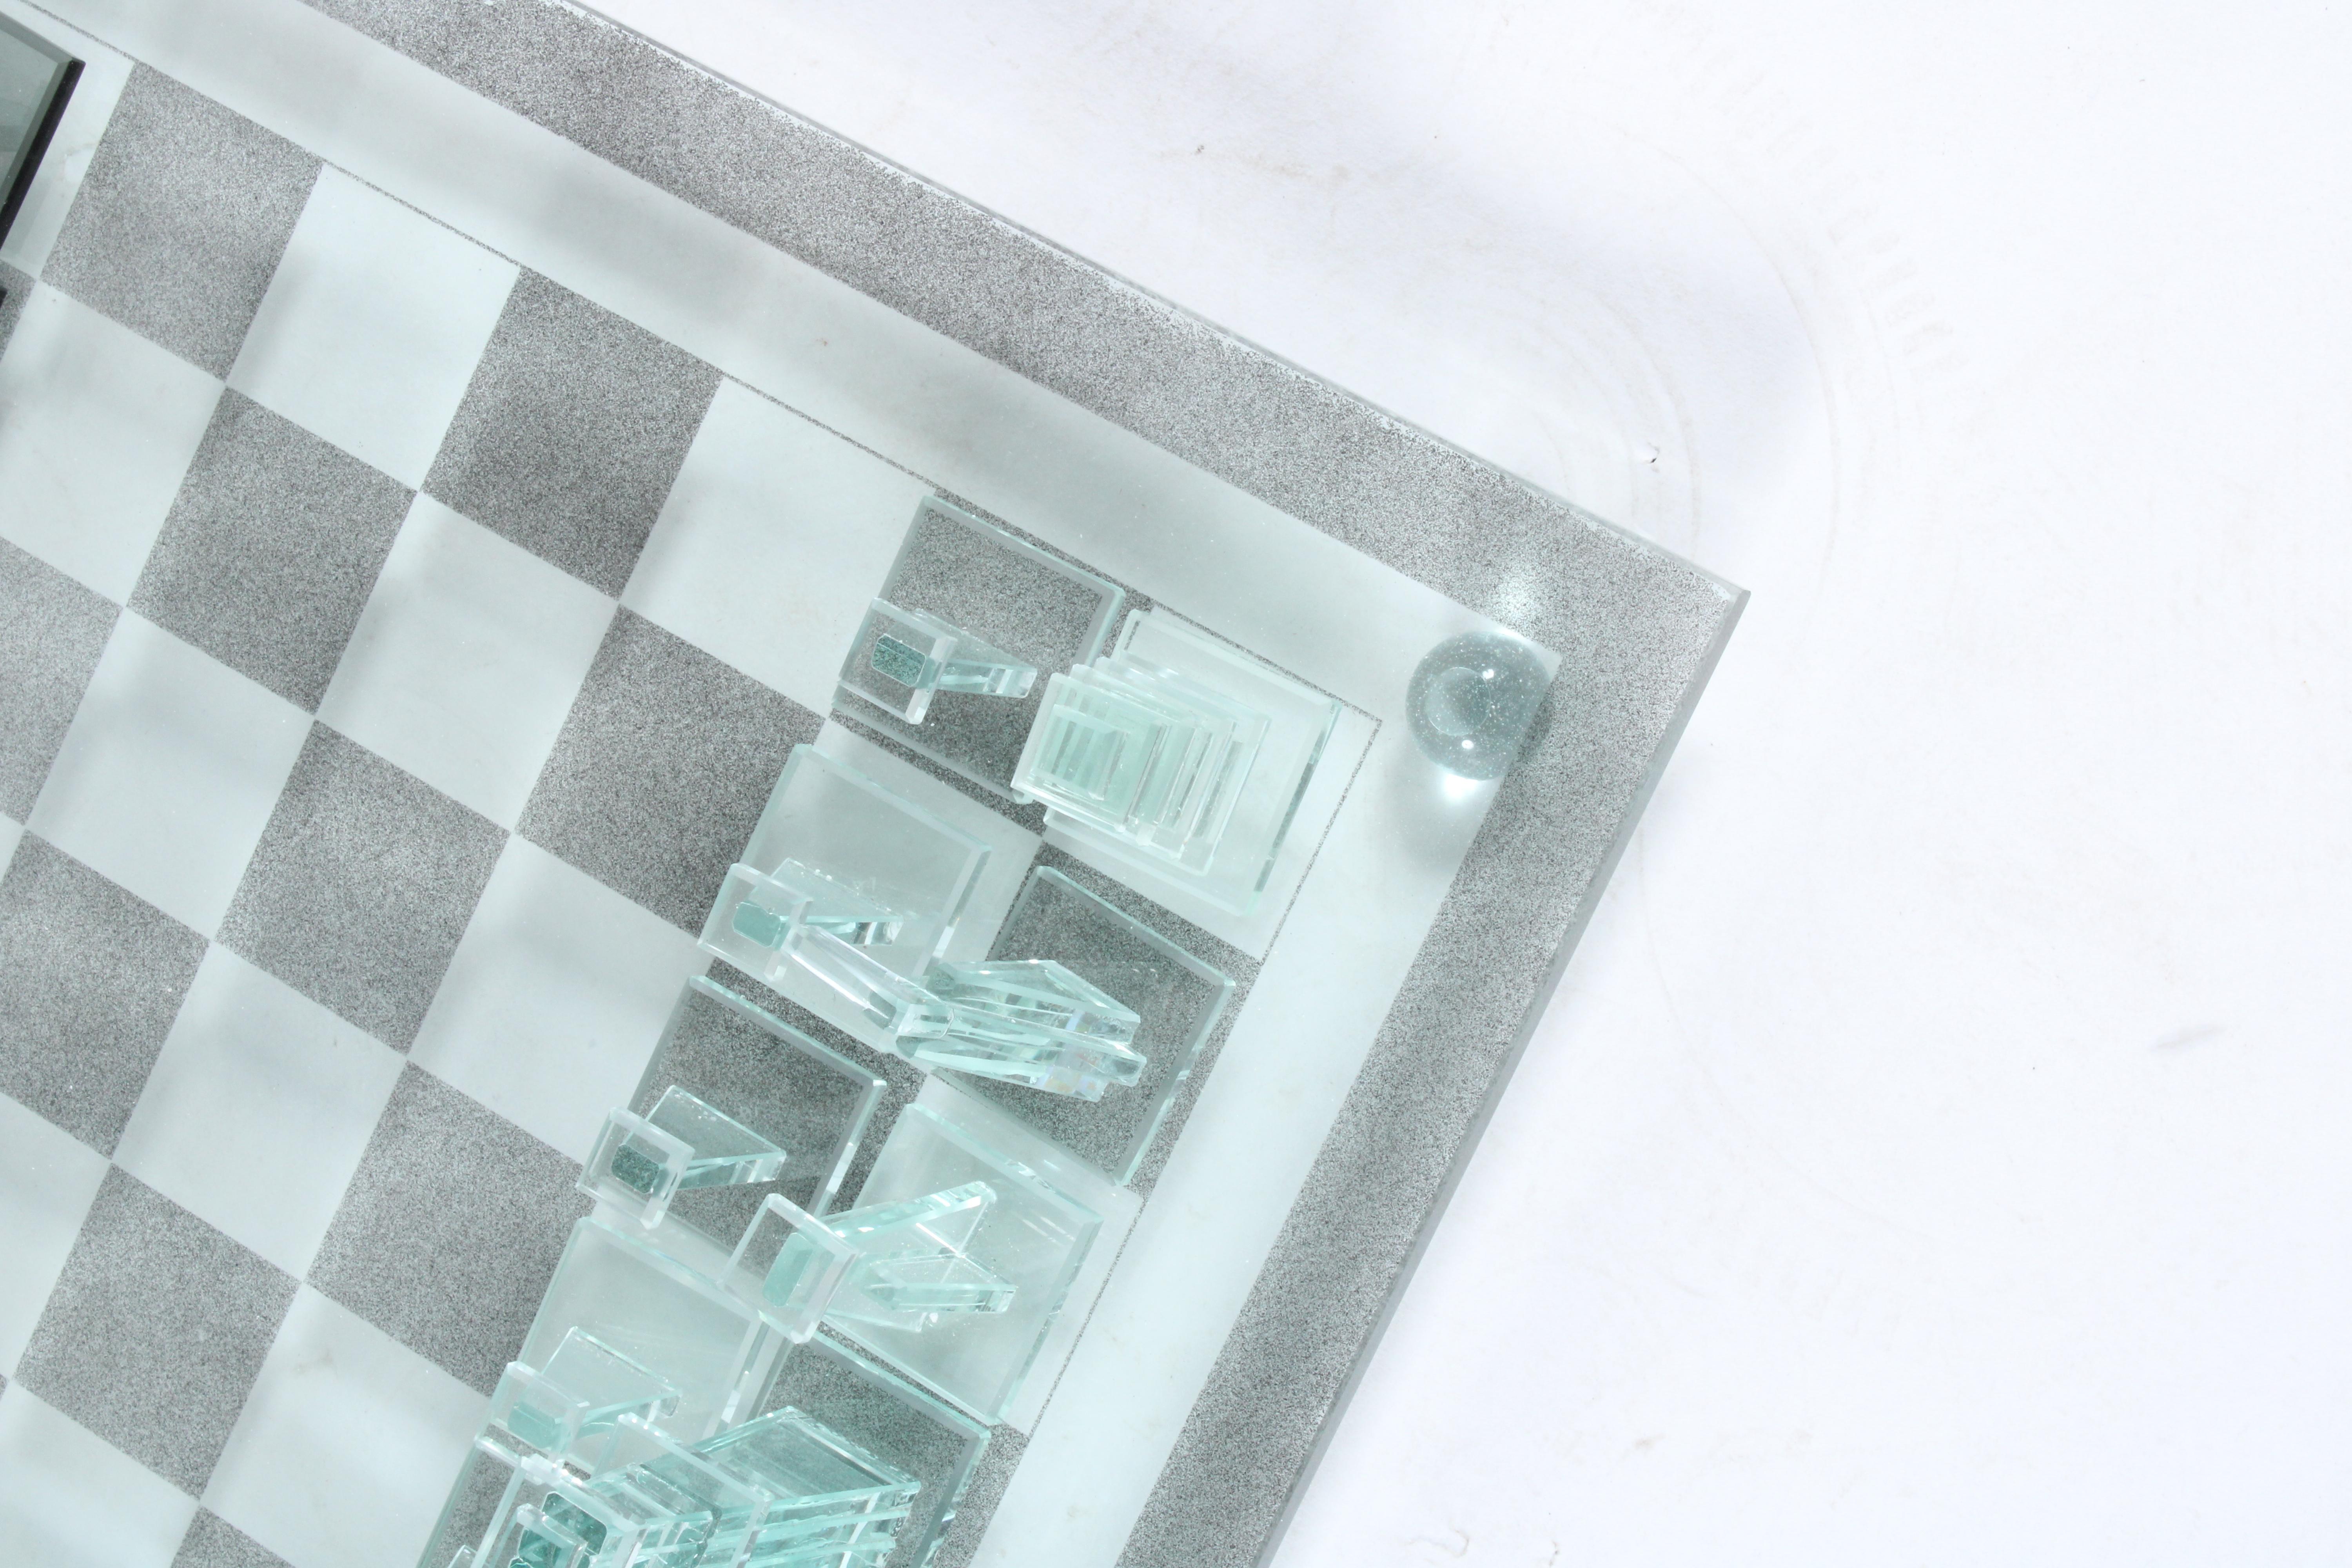 Etched Bespoke Vintage Artisan Glass Chess Set with board and pieces  *Free Shipping